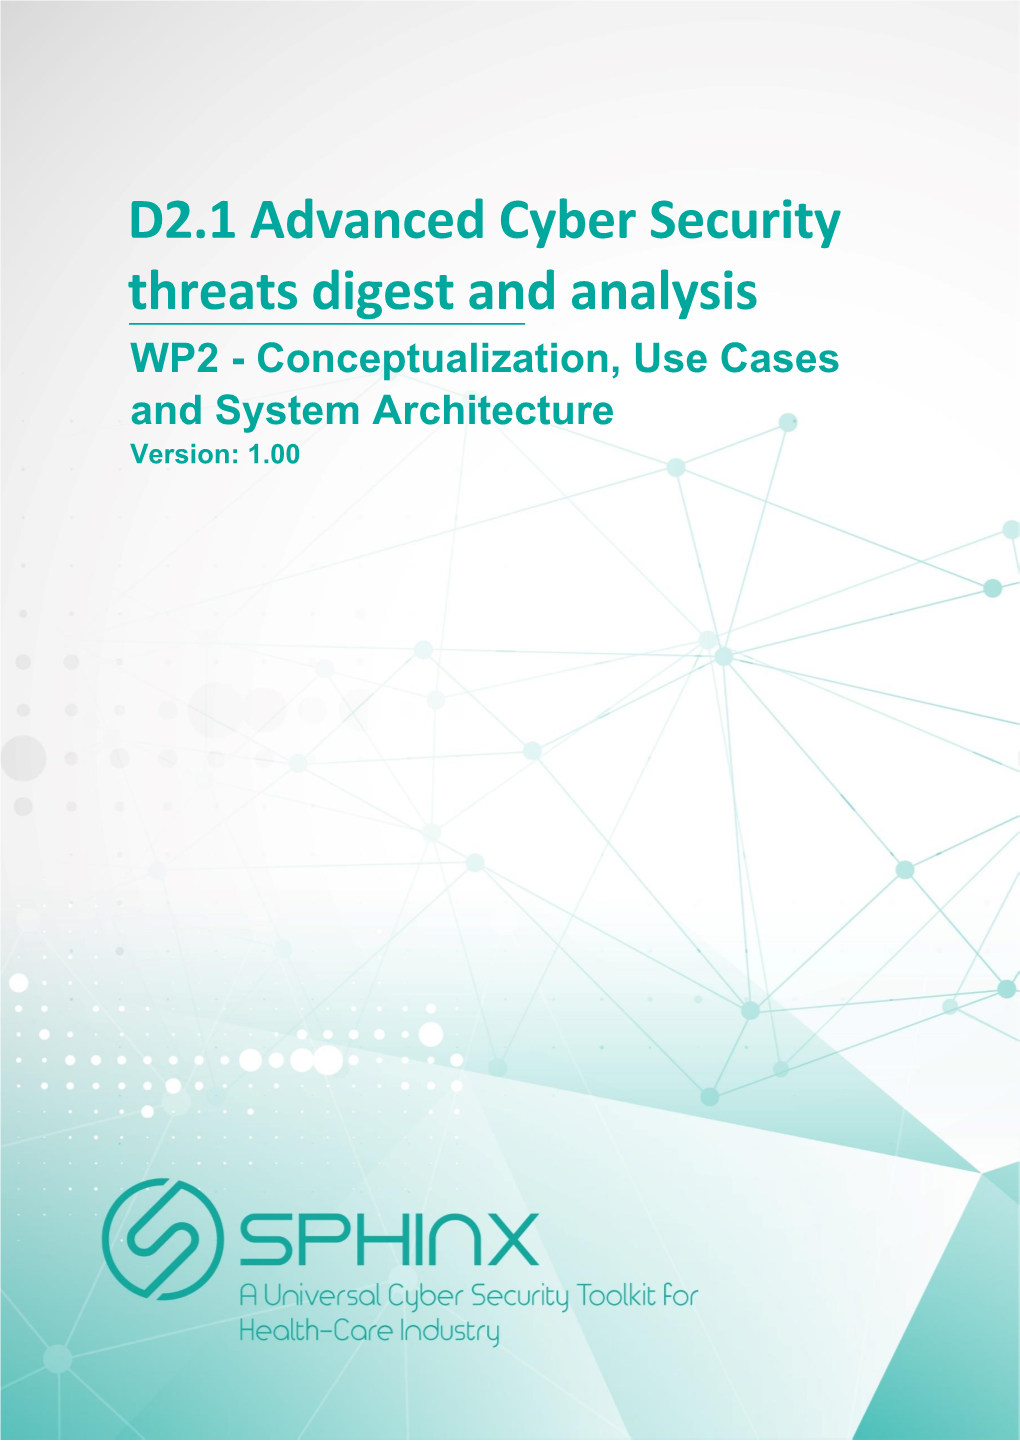 D2.1 Advanced Cyber Security Threats Digest and Analysis WP2 - Conceptualization, Use Cases and System Architecture Version: 1.00